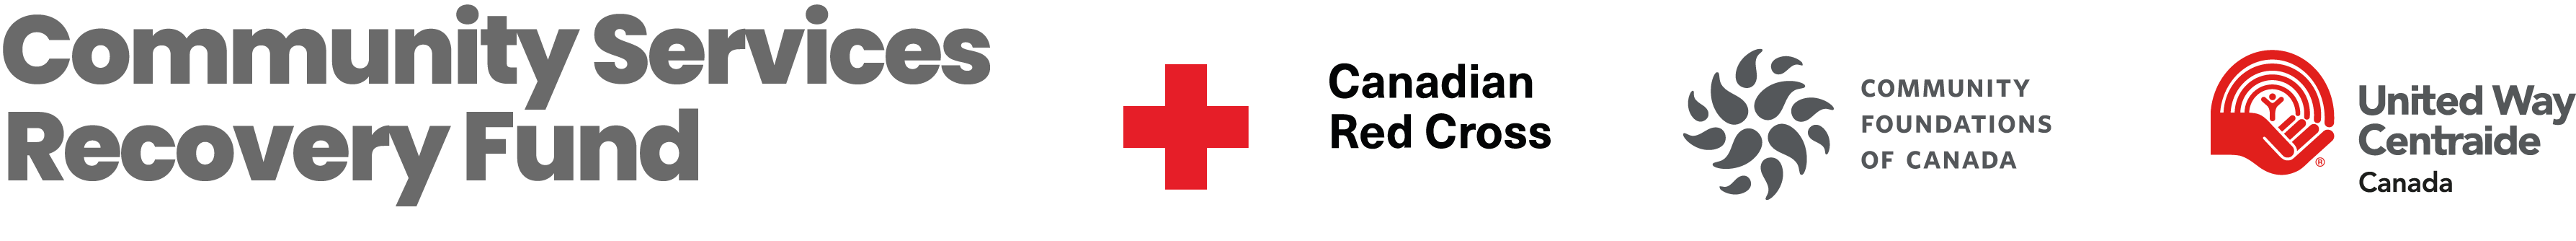 Community Services Recovery Fund, Canadian Red Cross logo, Community Foundations of Canada logo, United Way Centraide Logo